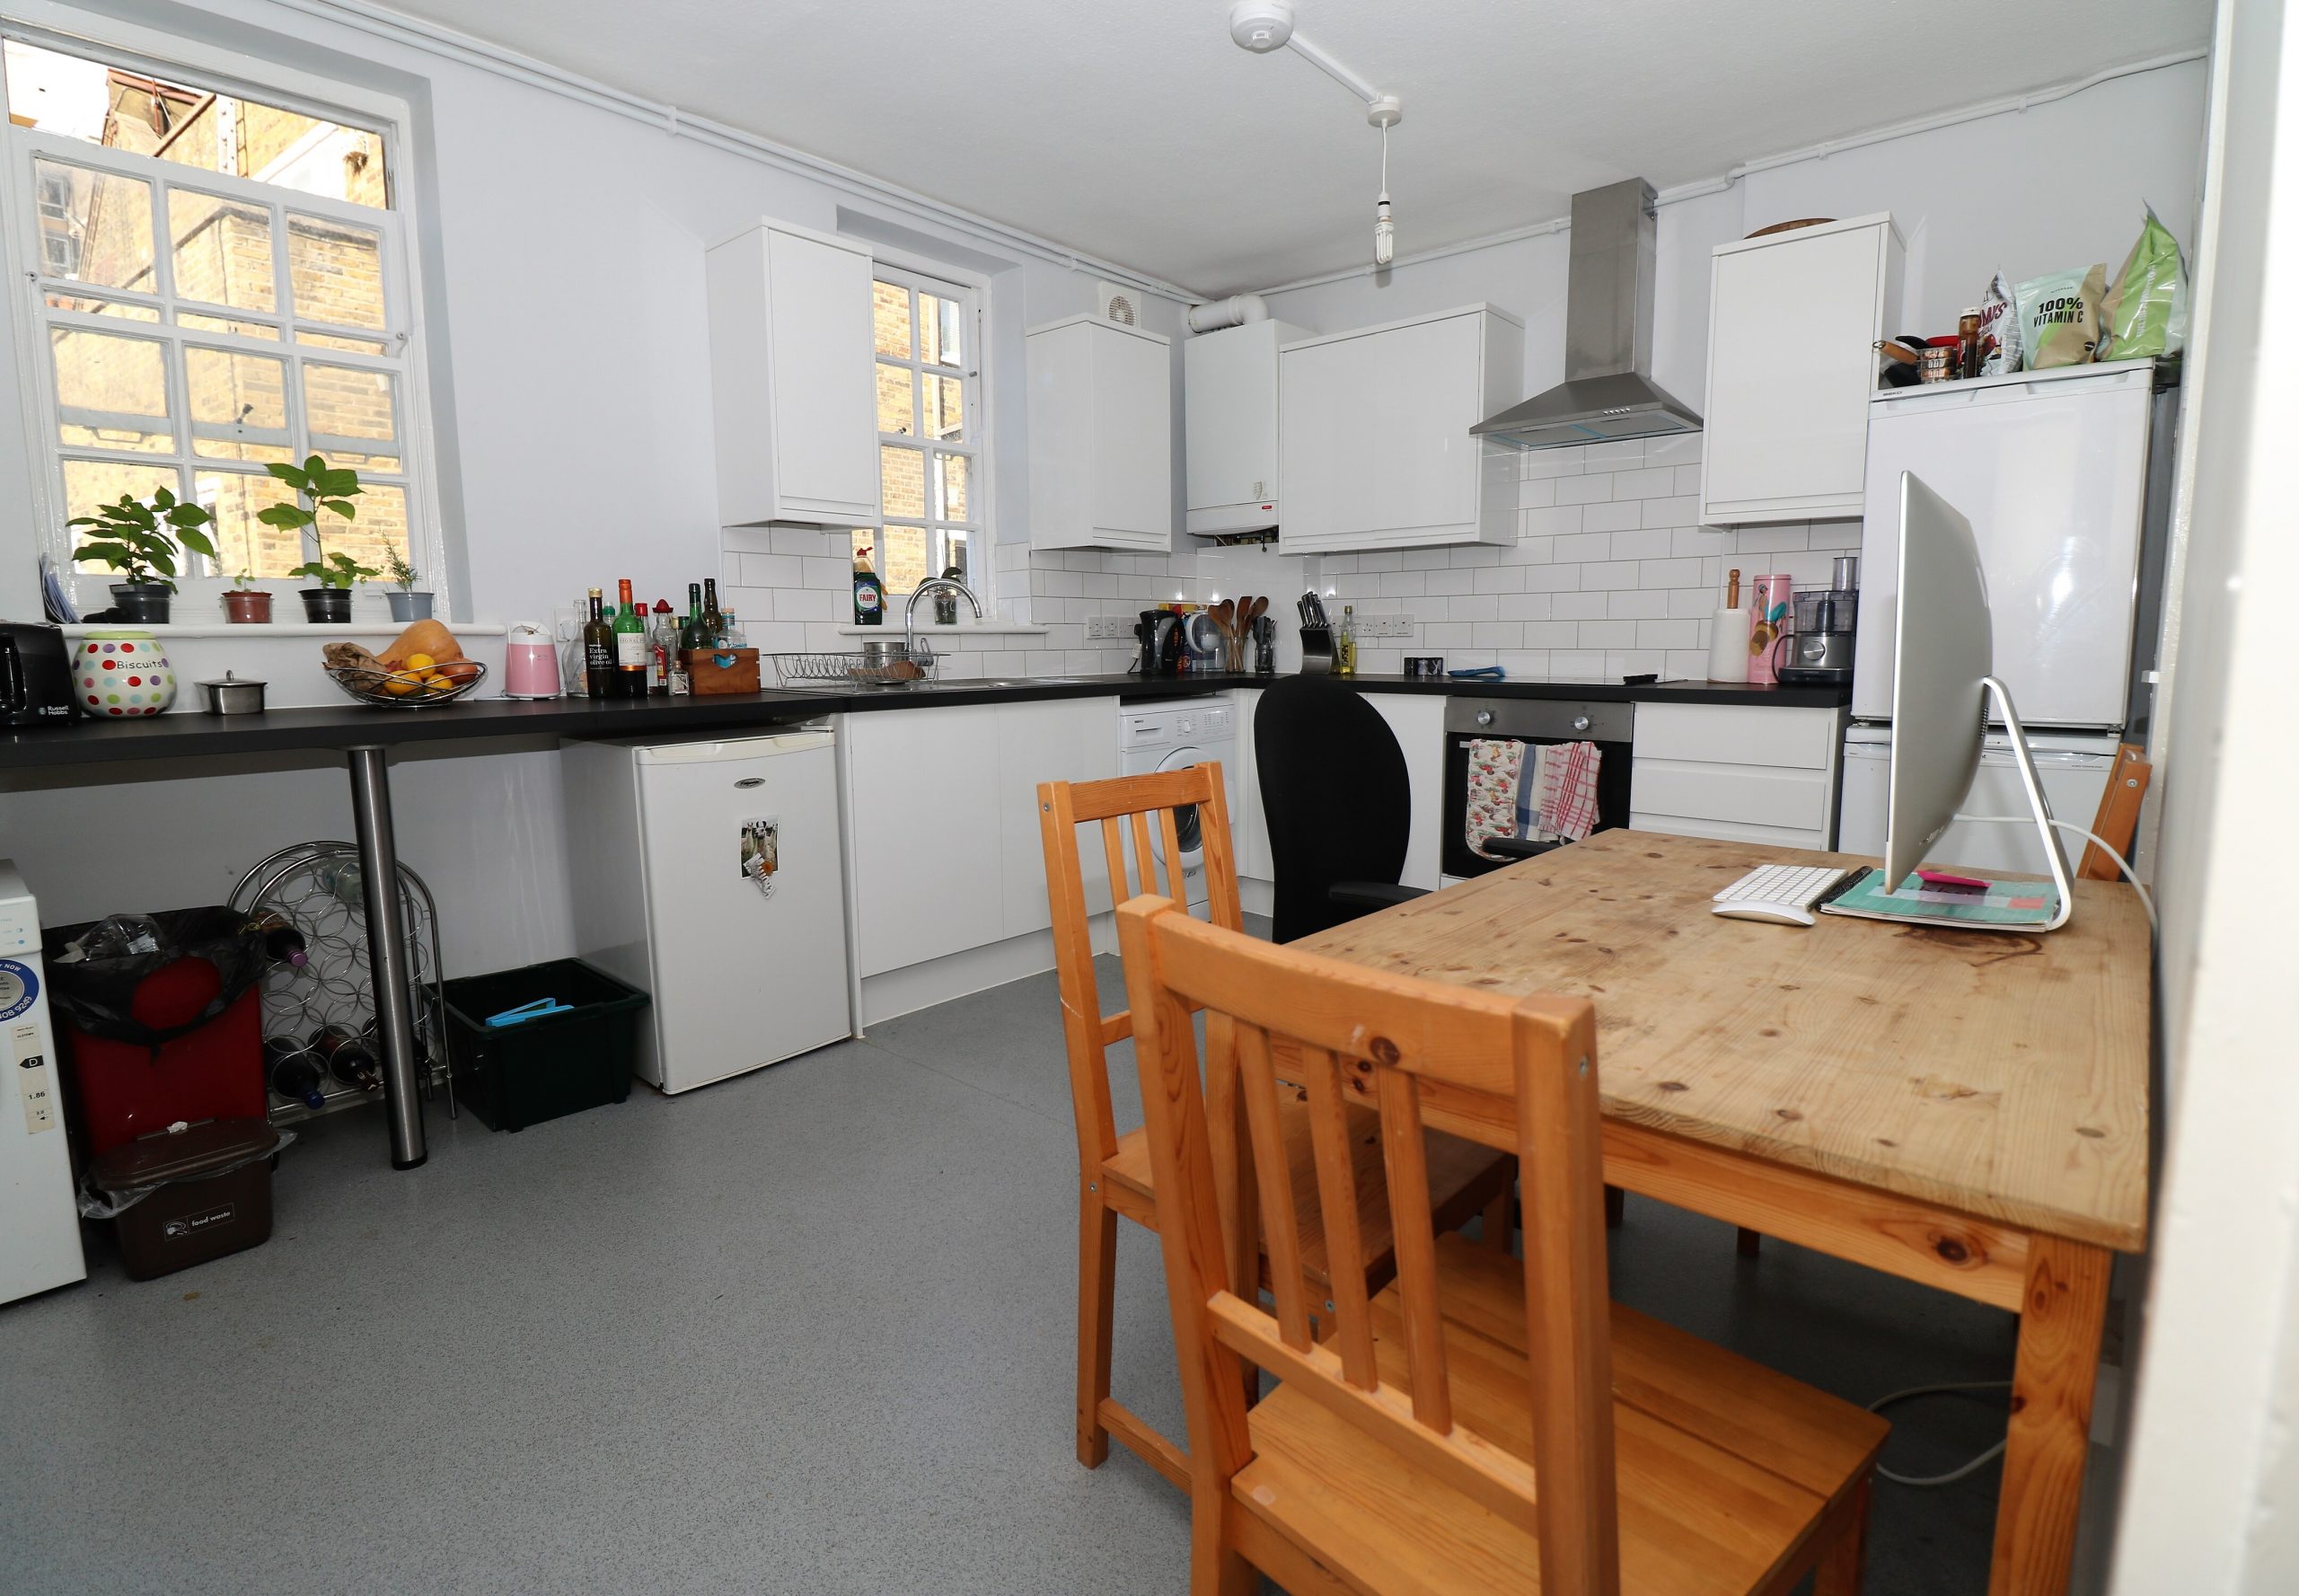 The Mansions in N19. Three double bedroom flat near Archway/ Crouch End side of Highgate